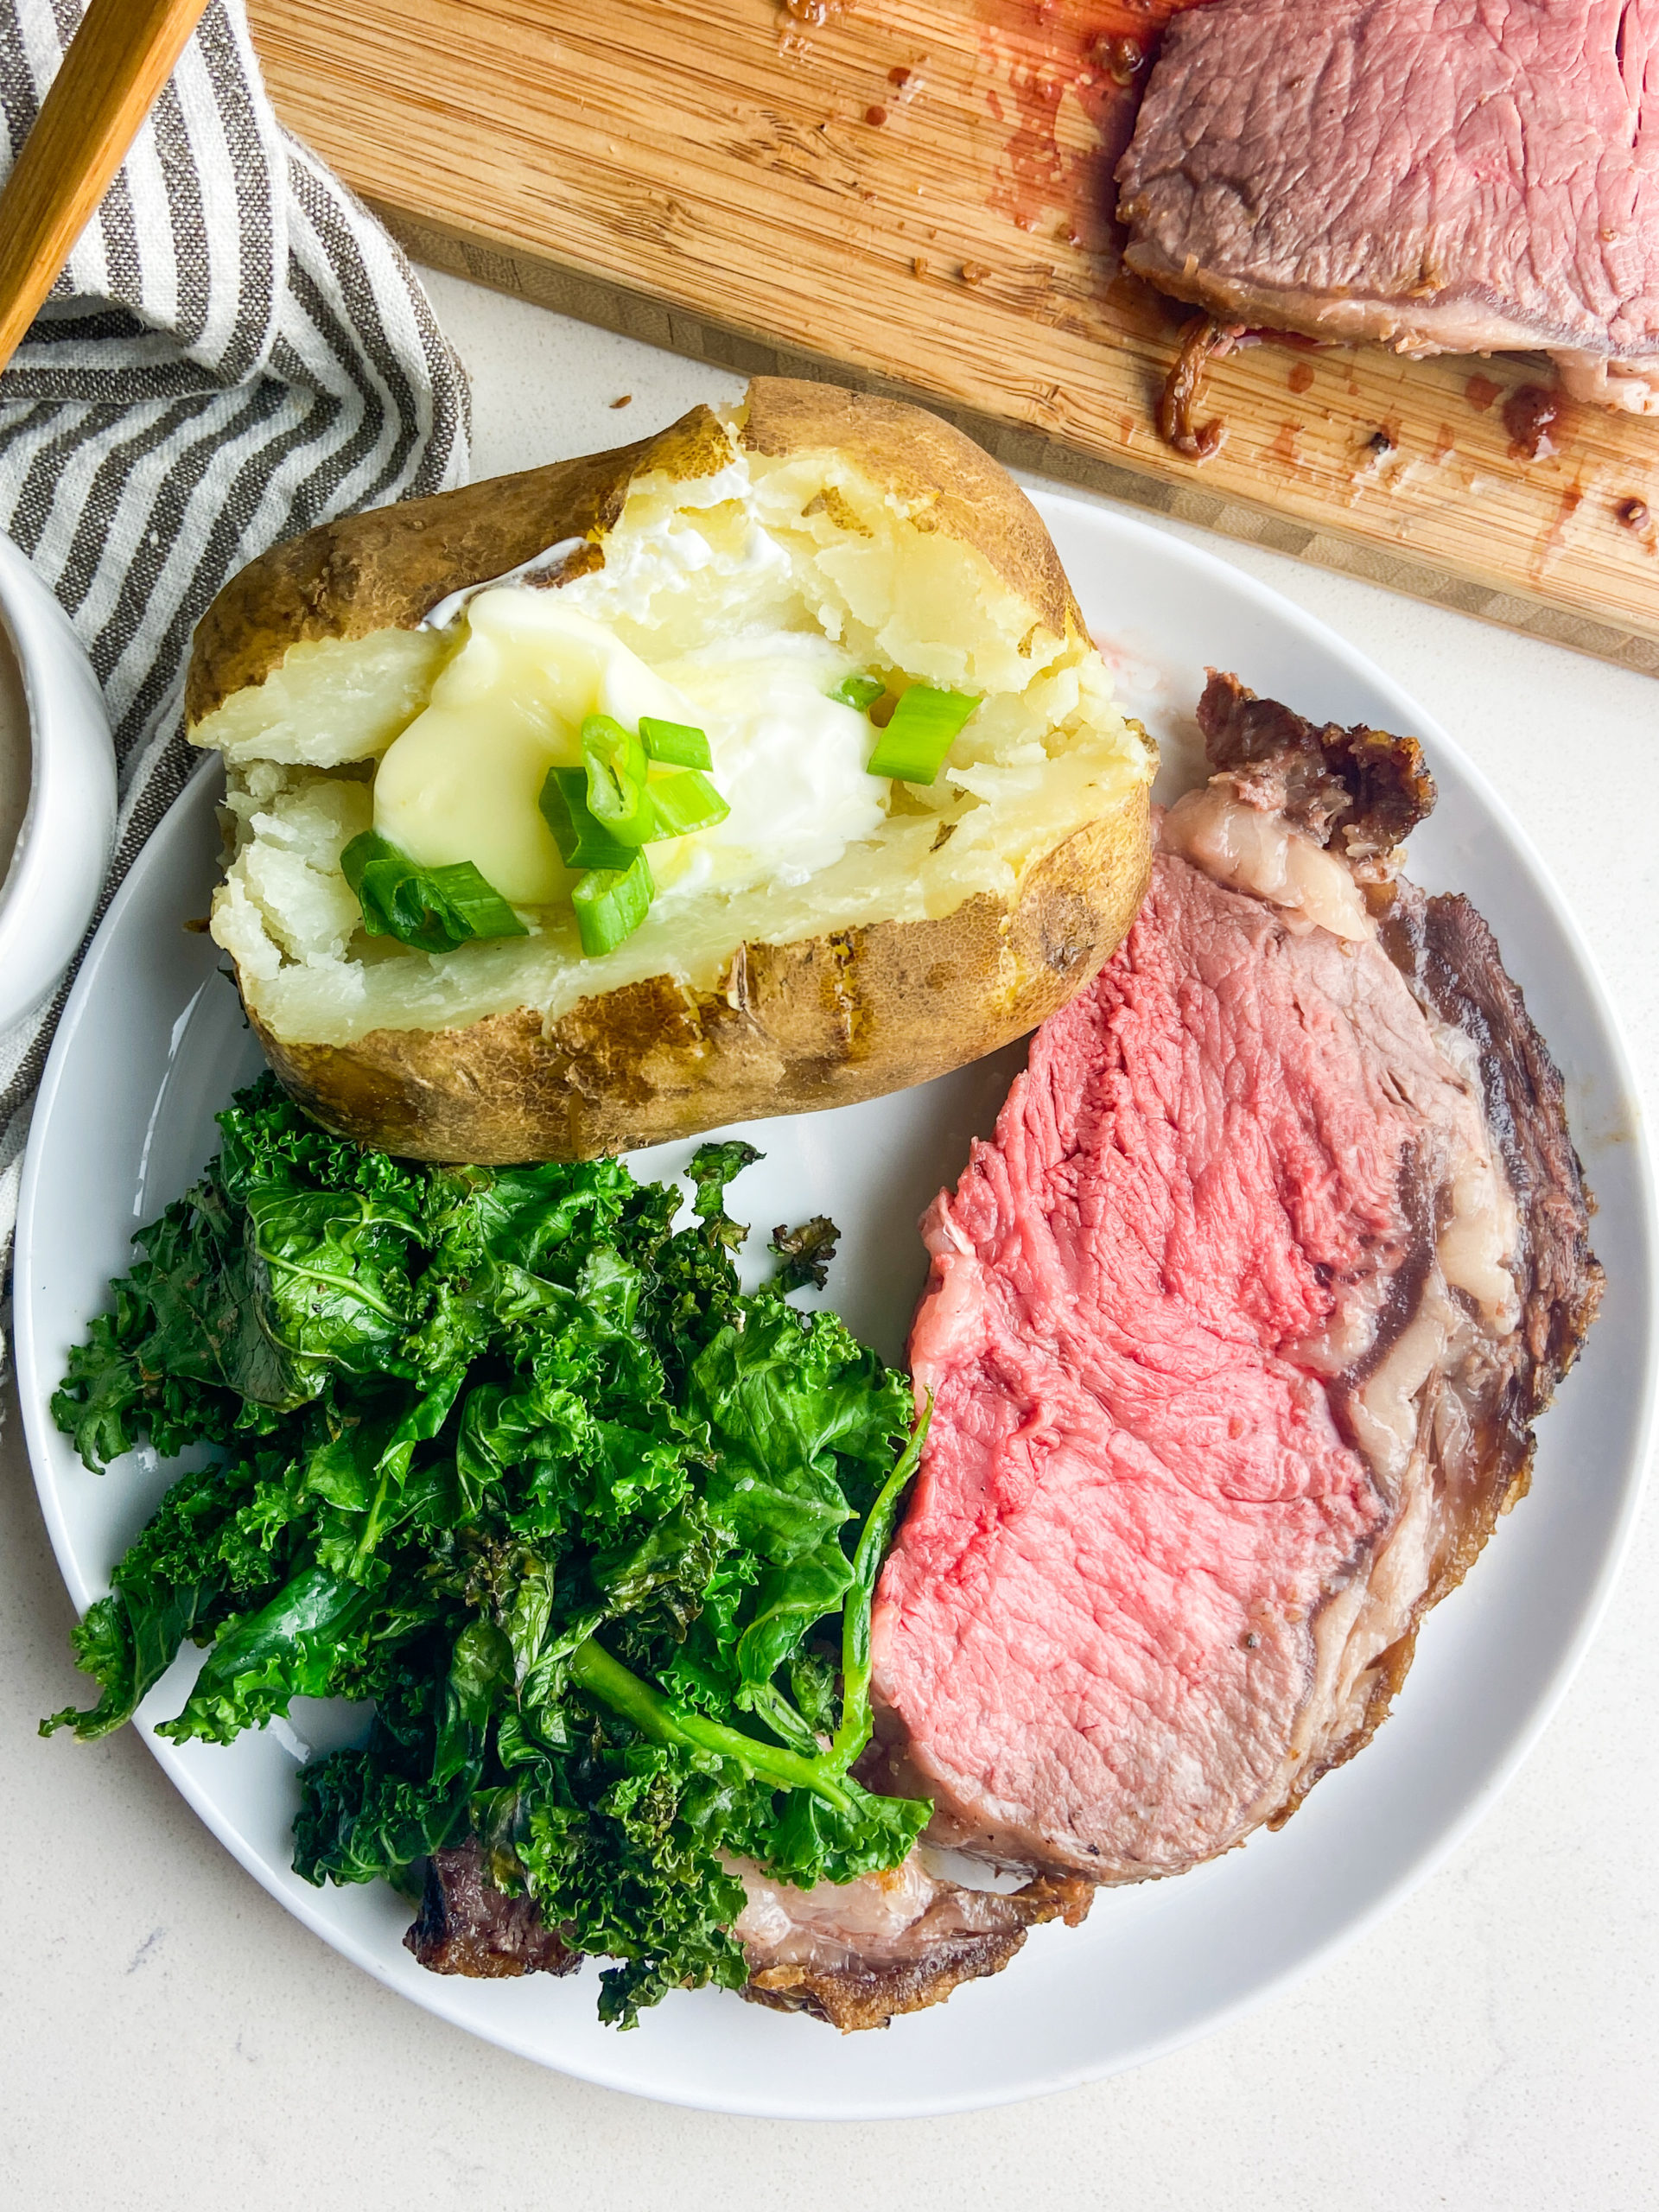 Prime rib on plate with baked potato and sauteed kale. 